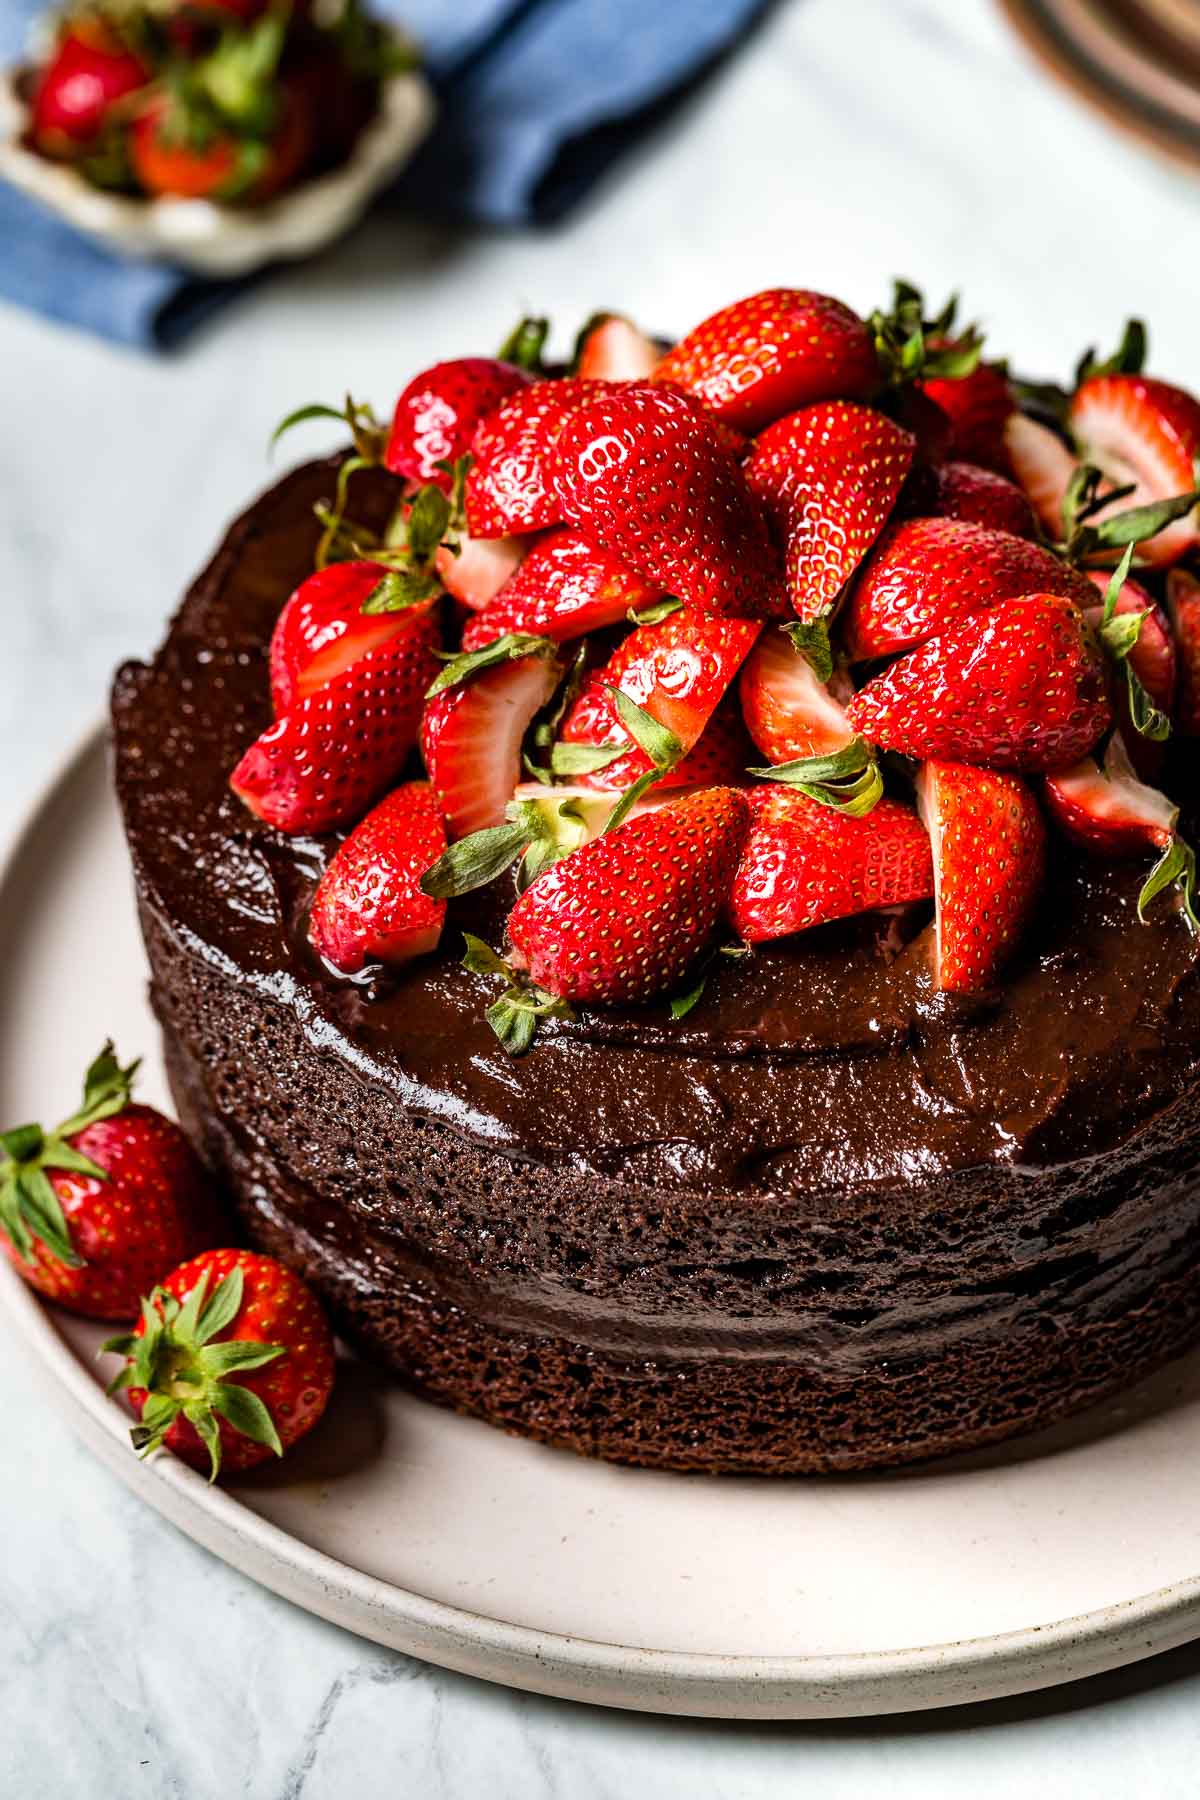 Almond flour chocolate cake topped off with strawberries as an example for almond flour desserts.